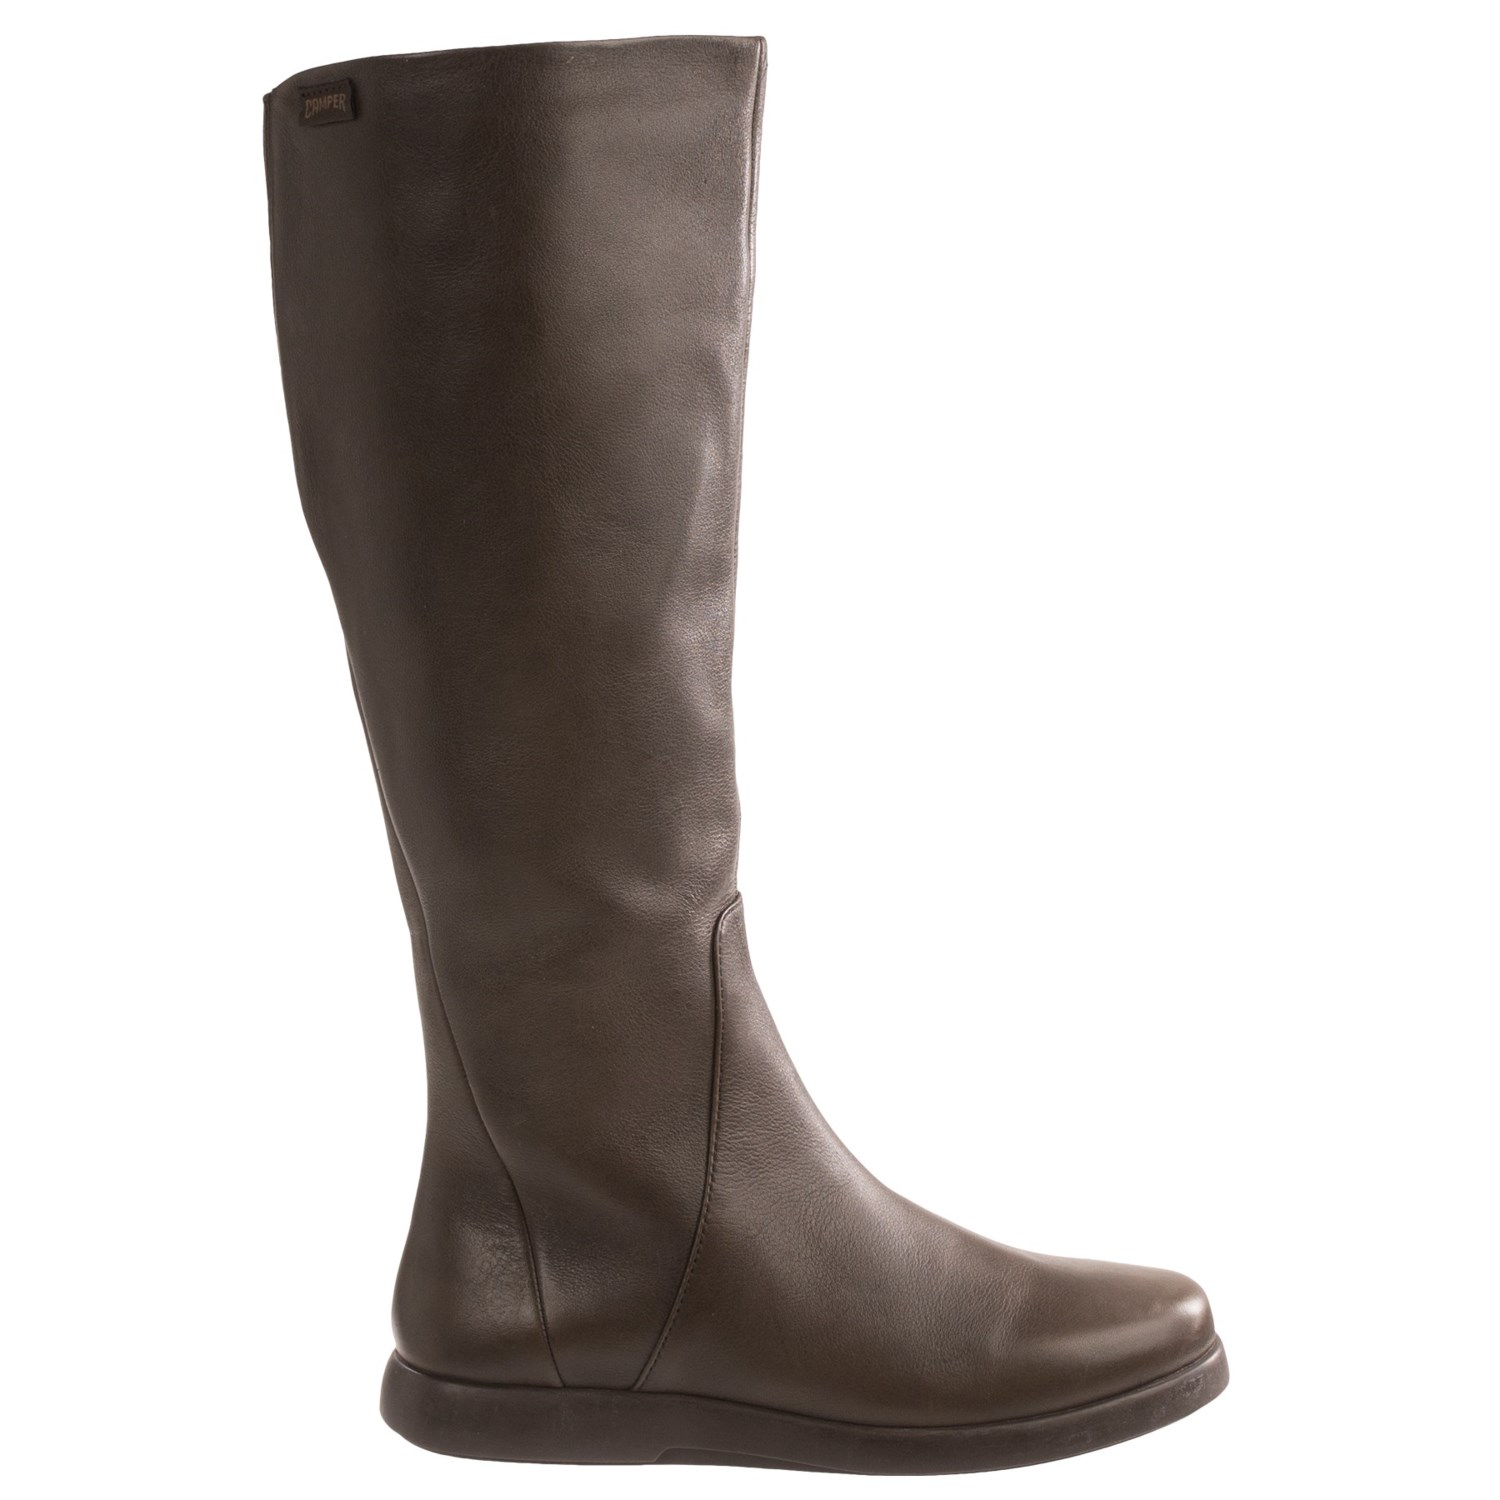 Camper Palmera Dry Tall Boot (For Women) 8465M - Save 62%